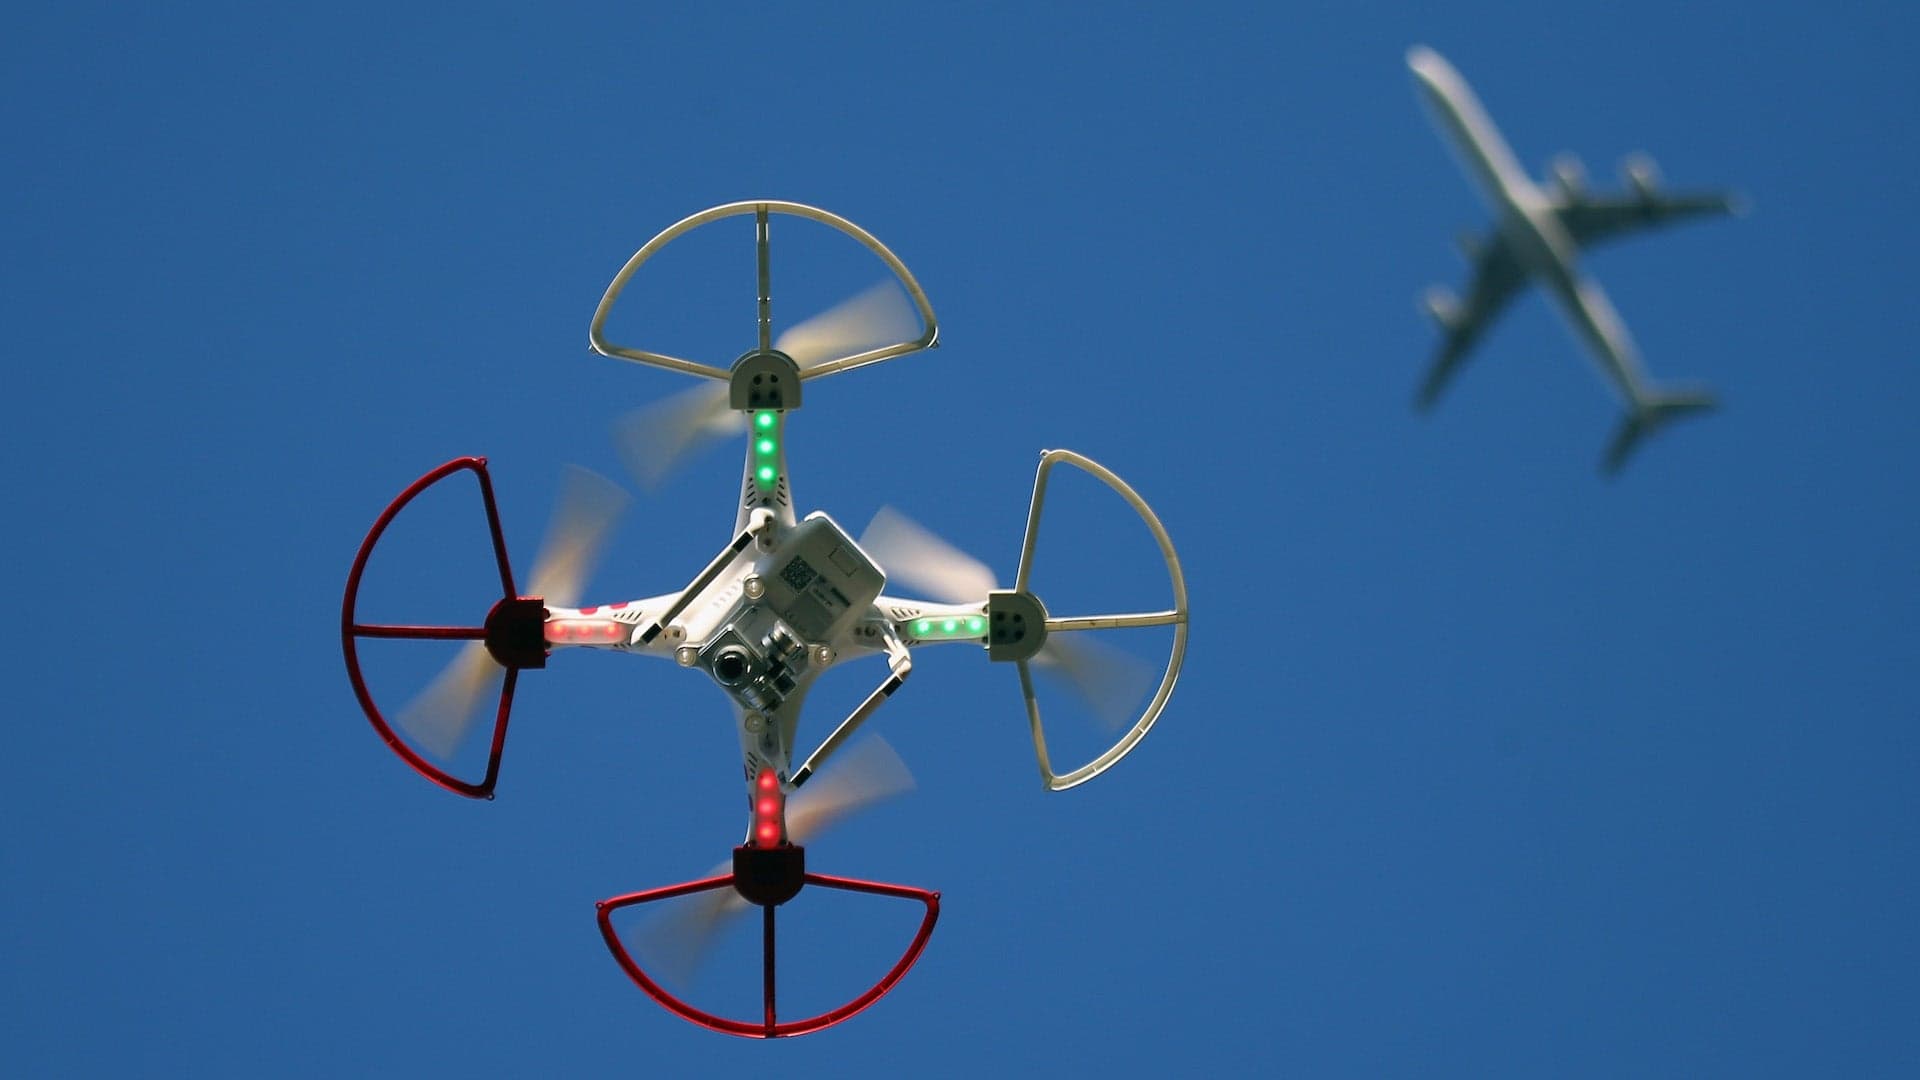 The British Are Crashing Drones Into Planes for Science